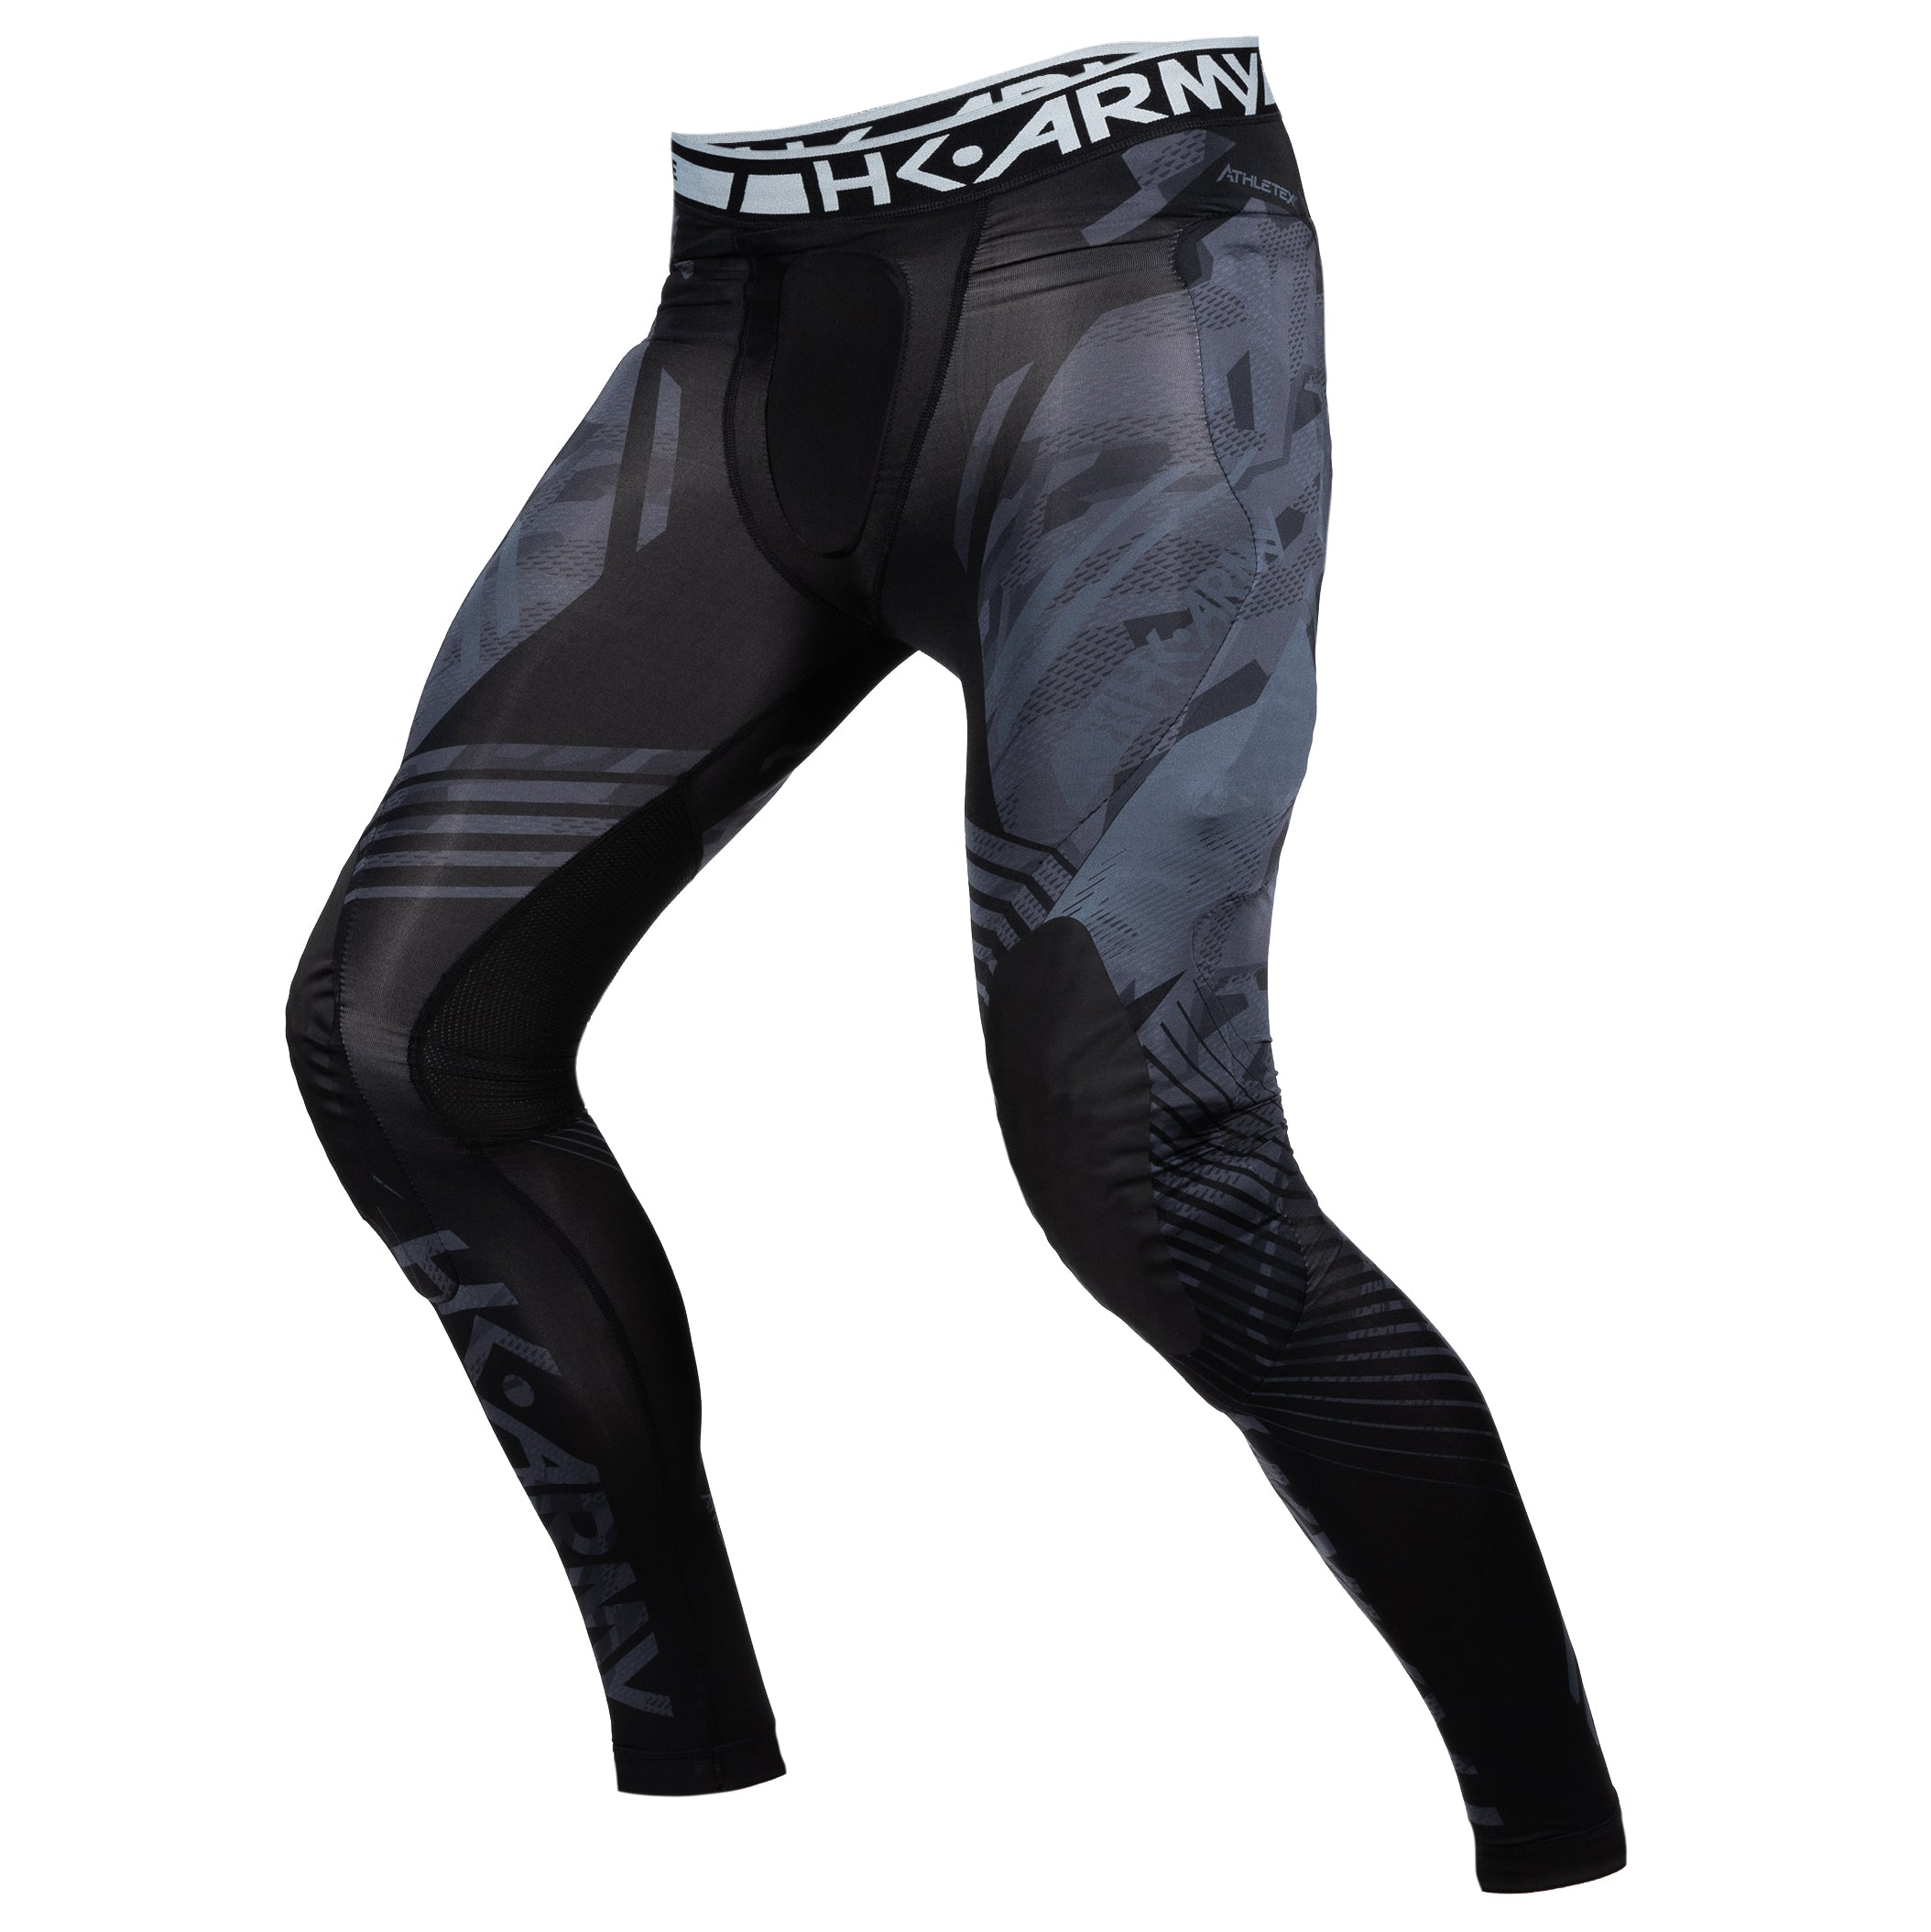 CTX Compression Padded Pants